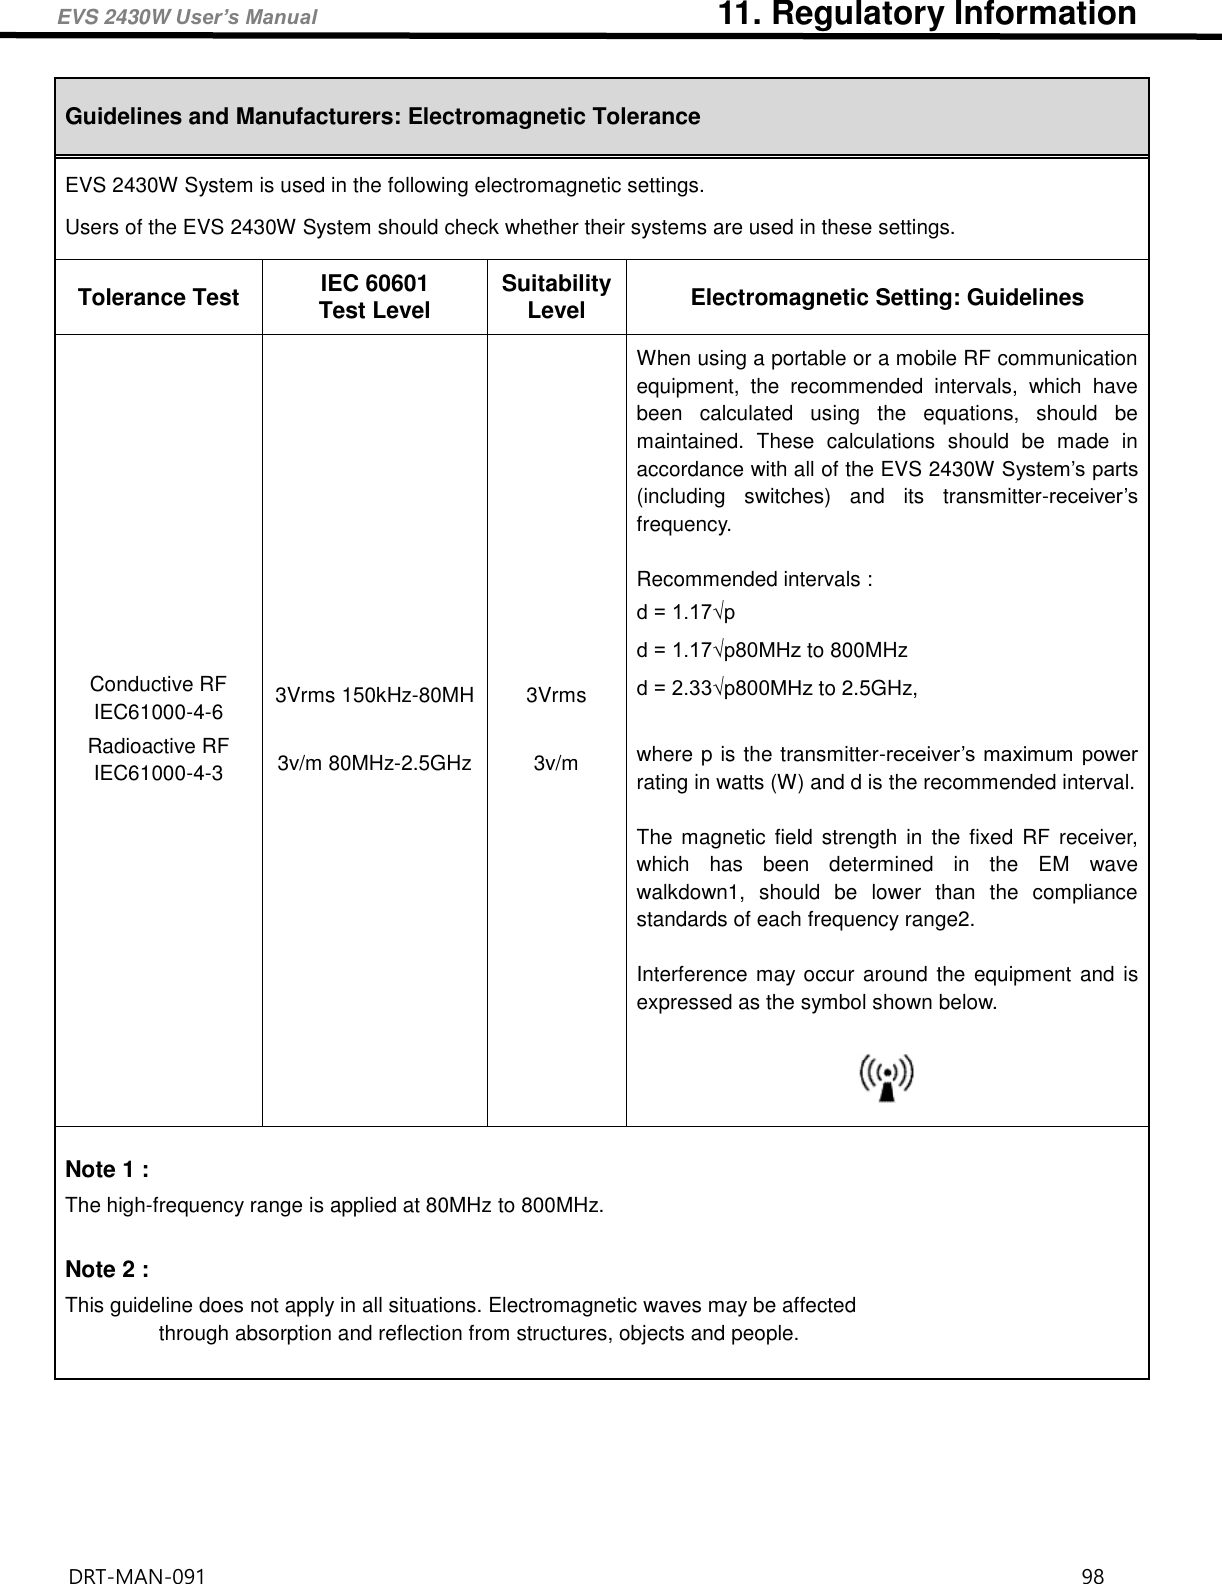 EVS 2430W User’s Manual                                                11. Regulatory Information DRT-MAN-091                                                                                    98       Guidelines and Manufacturers: Electromagnetic Tolerance EVS 2430W System is used in the following electromagnetic settings. Users of the EVS 2430W System should check whether their systems are used in these settings. Tolerance Test IEC 60601 Test Level Suitability Level Electromagnetic Setting: Guidelines Conductive RF IEC61000-4-6 Radioactive RF IEC61000-4-3 3Vrms 150kHz-80MH  3v/m 80MHz-2.5GHz 3Vrms  3v/m When using a portable or a mobile RF communication equipment,  the  recommended  intervals,  which  have been  calculated  using  the  equations,  should  be maintained.  These  calculations  should  be  made  in accordance with all of the EVS 2430W System’s parts (including  switches)  and  its  transmitter-receiver’s frequency.  Recommended intervals : d = 1.17√p d = 1.17√p80MHz to 800MHz d = 2.33√p800MHz to 2.5GHz,  where p is the transmitter-receiver’s maximum power rating in watts (W) and d is the recommended interval.  The magnetic field  strength in  the  fixed  RF  receiver, which  has  been  determined  in  the  EM  wave walkdown1,  should  be  lower  than  the  compliance standards of each frequency range2.  Interference may occur around the equipment  and is expressed as the symbol shown below.   Note 1 : The high-frequency range is applied at 80MHz to 800MHz.  Note 2 : This guideline does not apply in all situations. Electromagnetic waves may be affected   through absorption and reflection from structures, objects and people. 